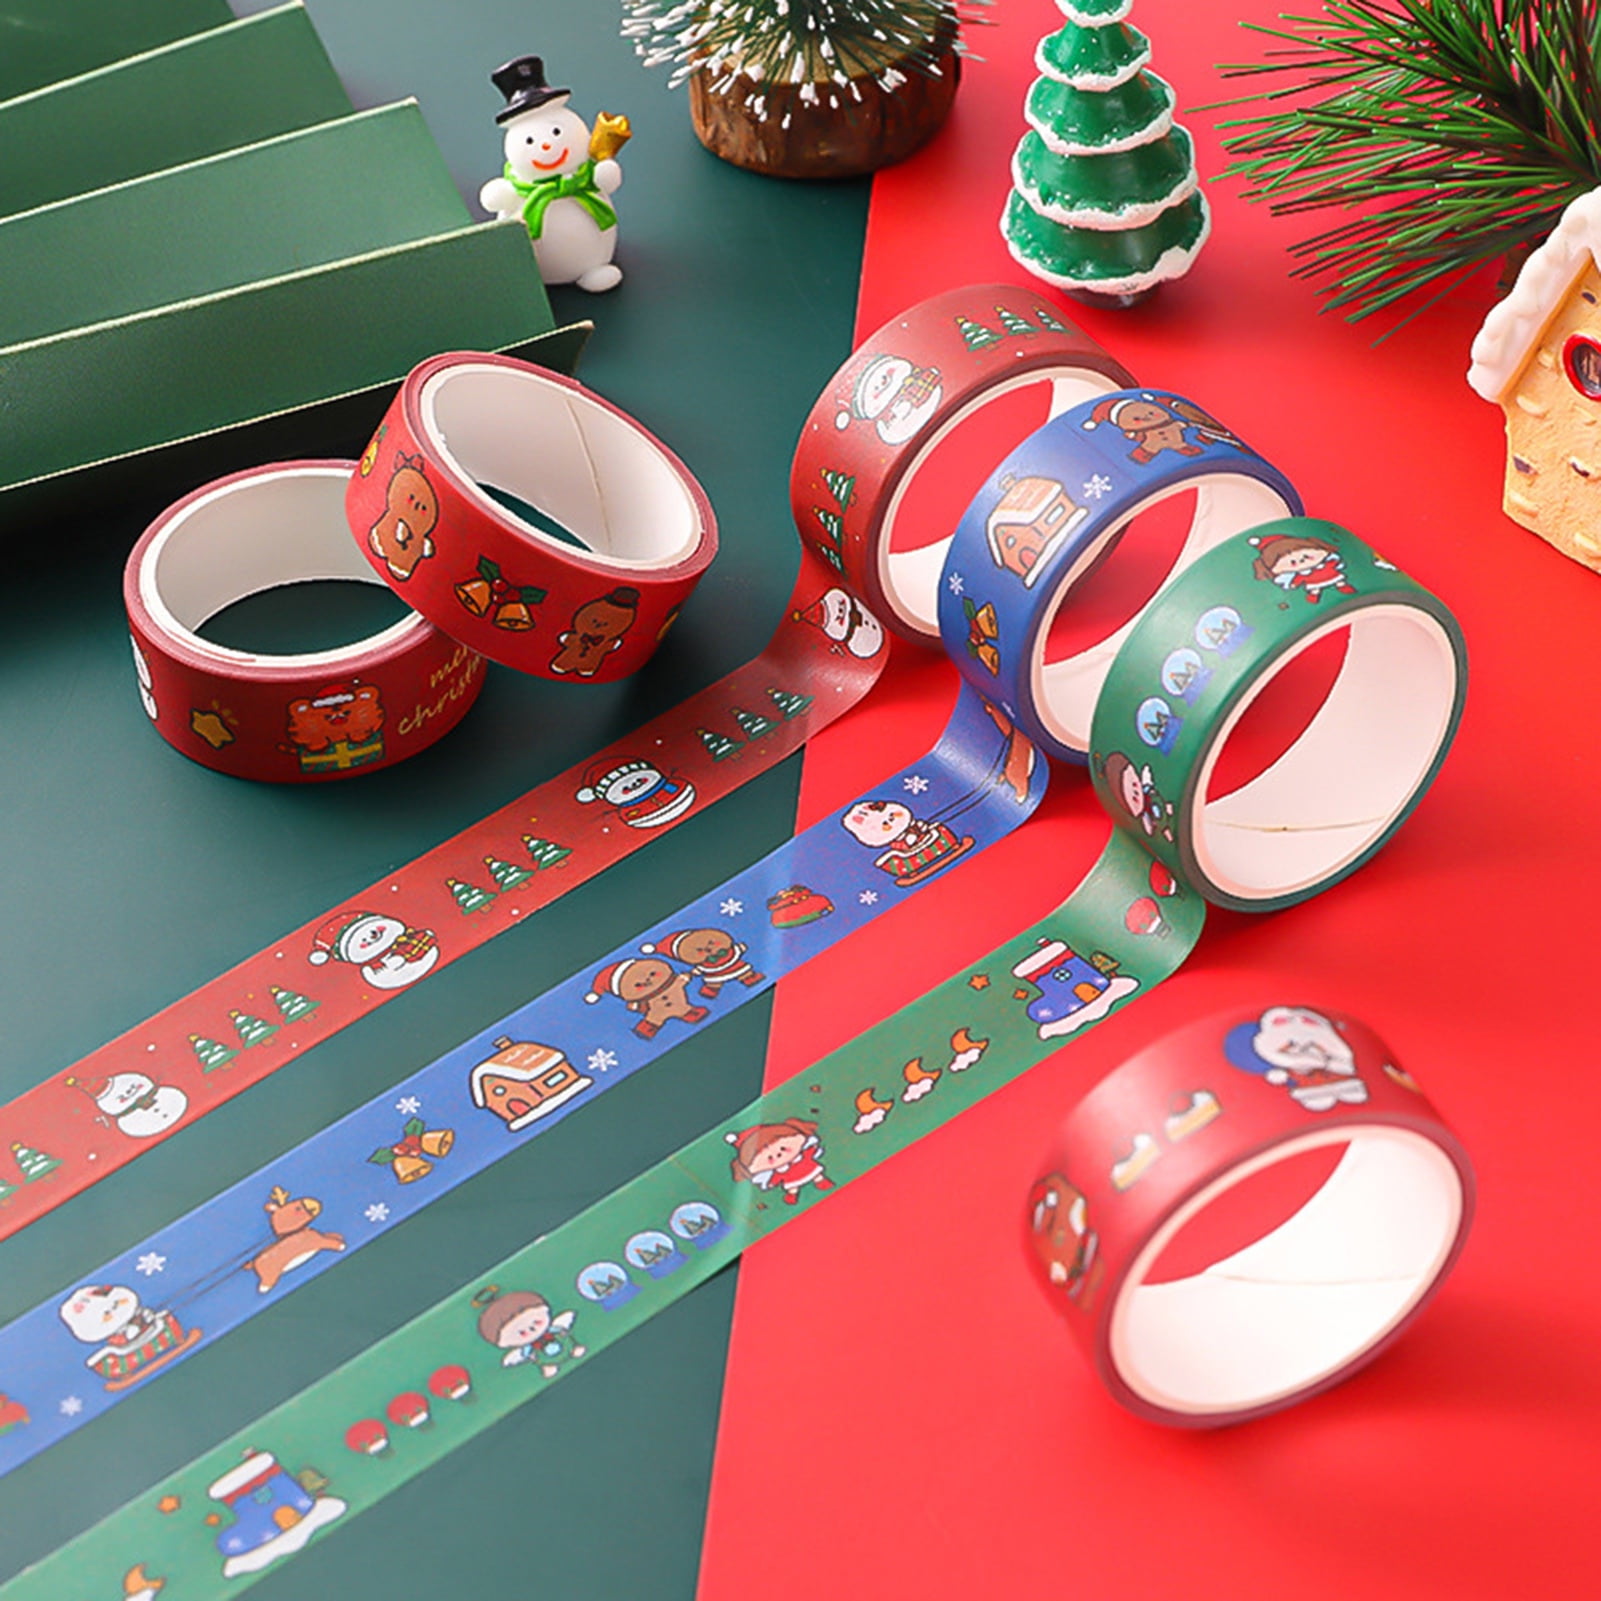 Craft Projects. Tree Decoration Scrapbooking Christmas Washi Tapes 48 Rolls-15mm Wide Masking Tape Set Covering Different Christmas Holiday Patterns for DIY Christmas Card Gift Packaging 